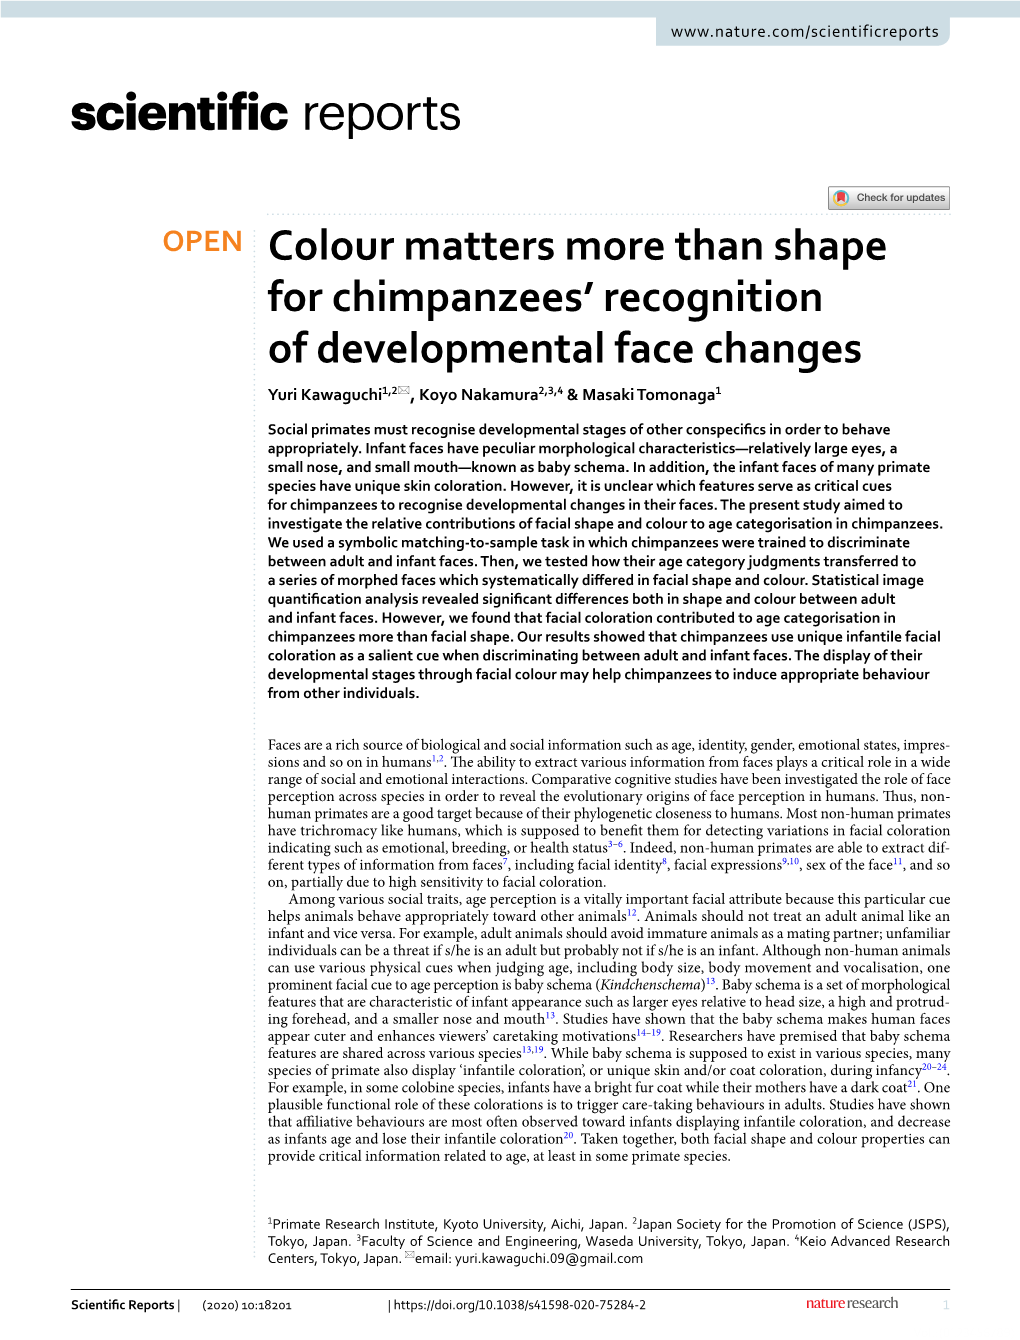 Colour Matters More Than Shape for Chimpanzees' Recognition Of